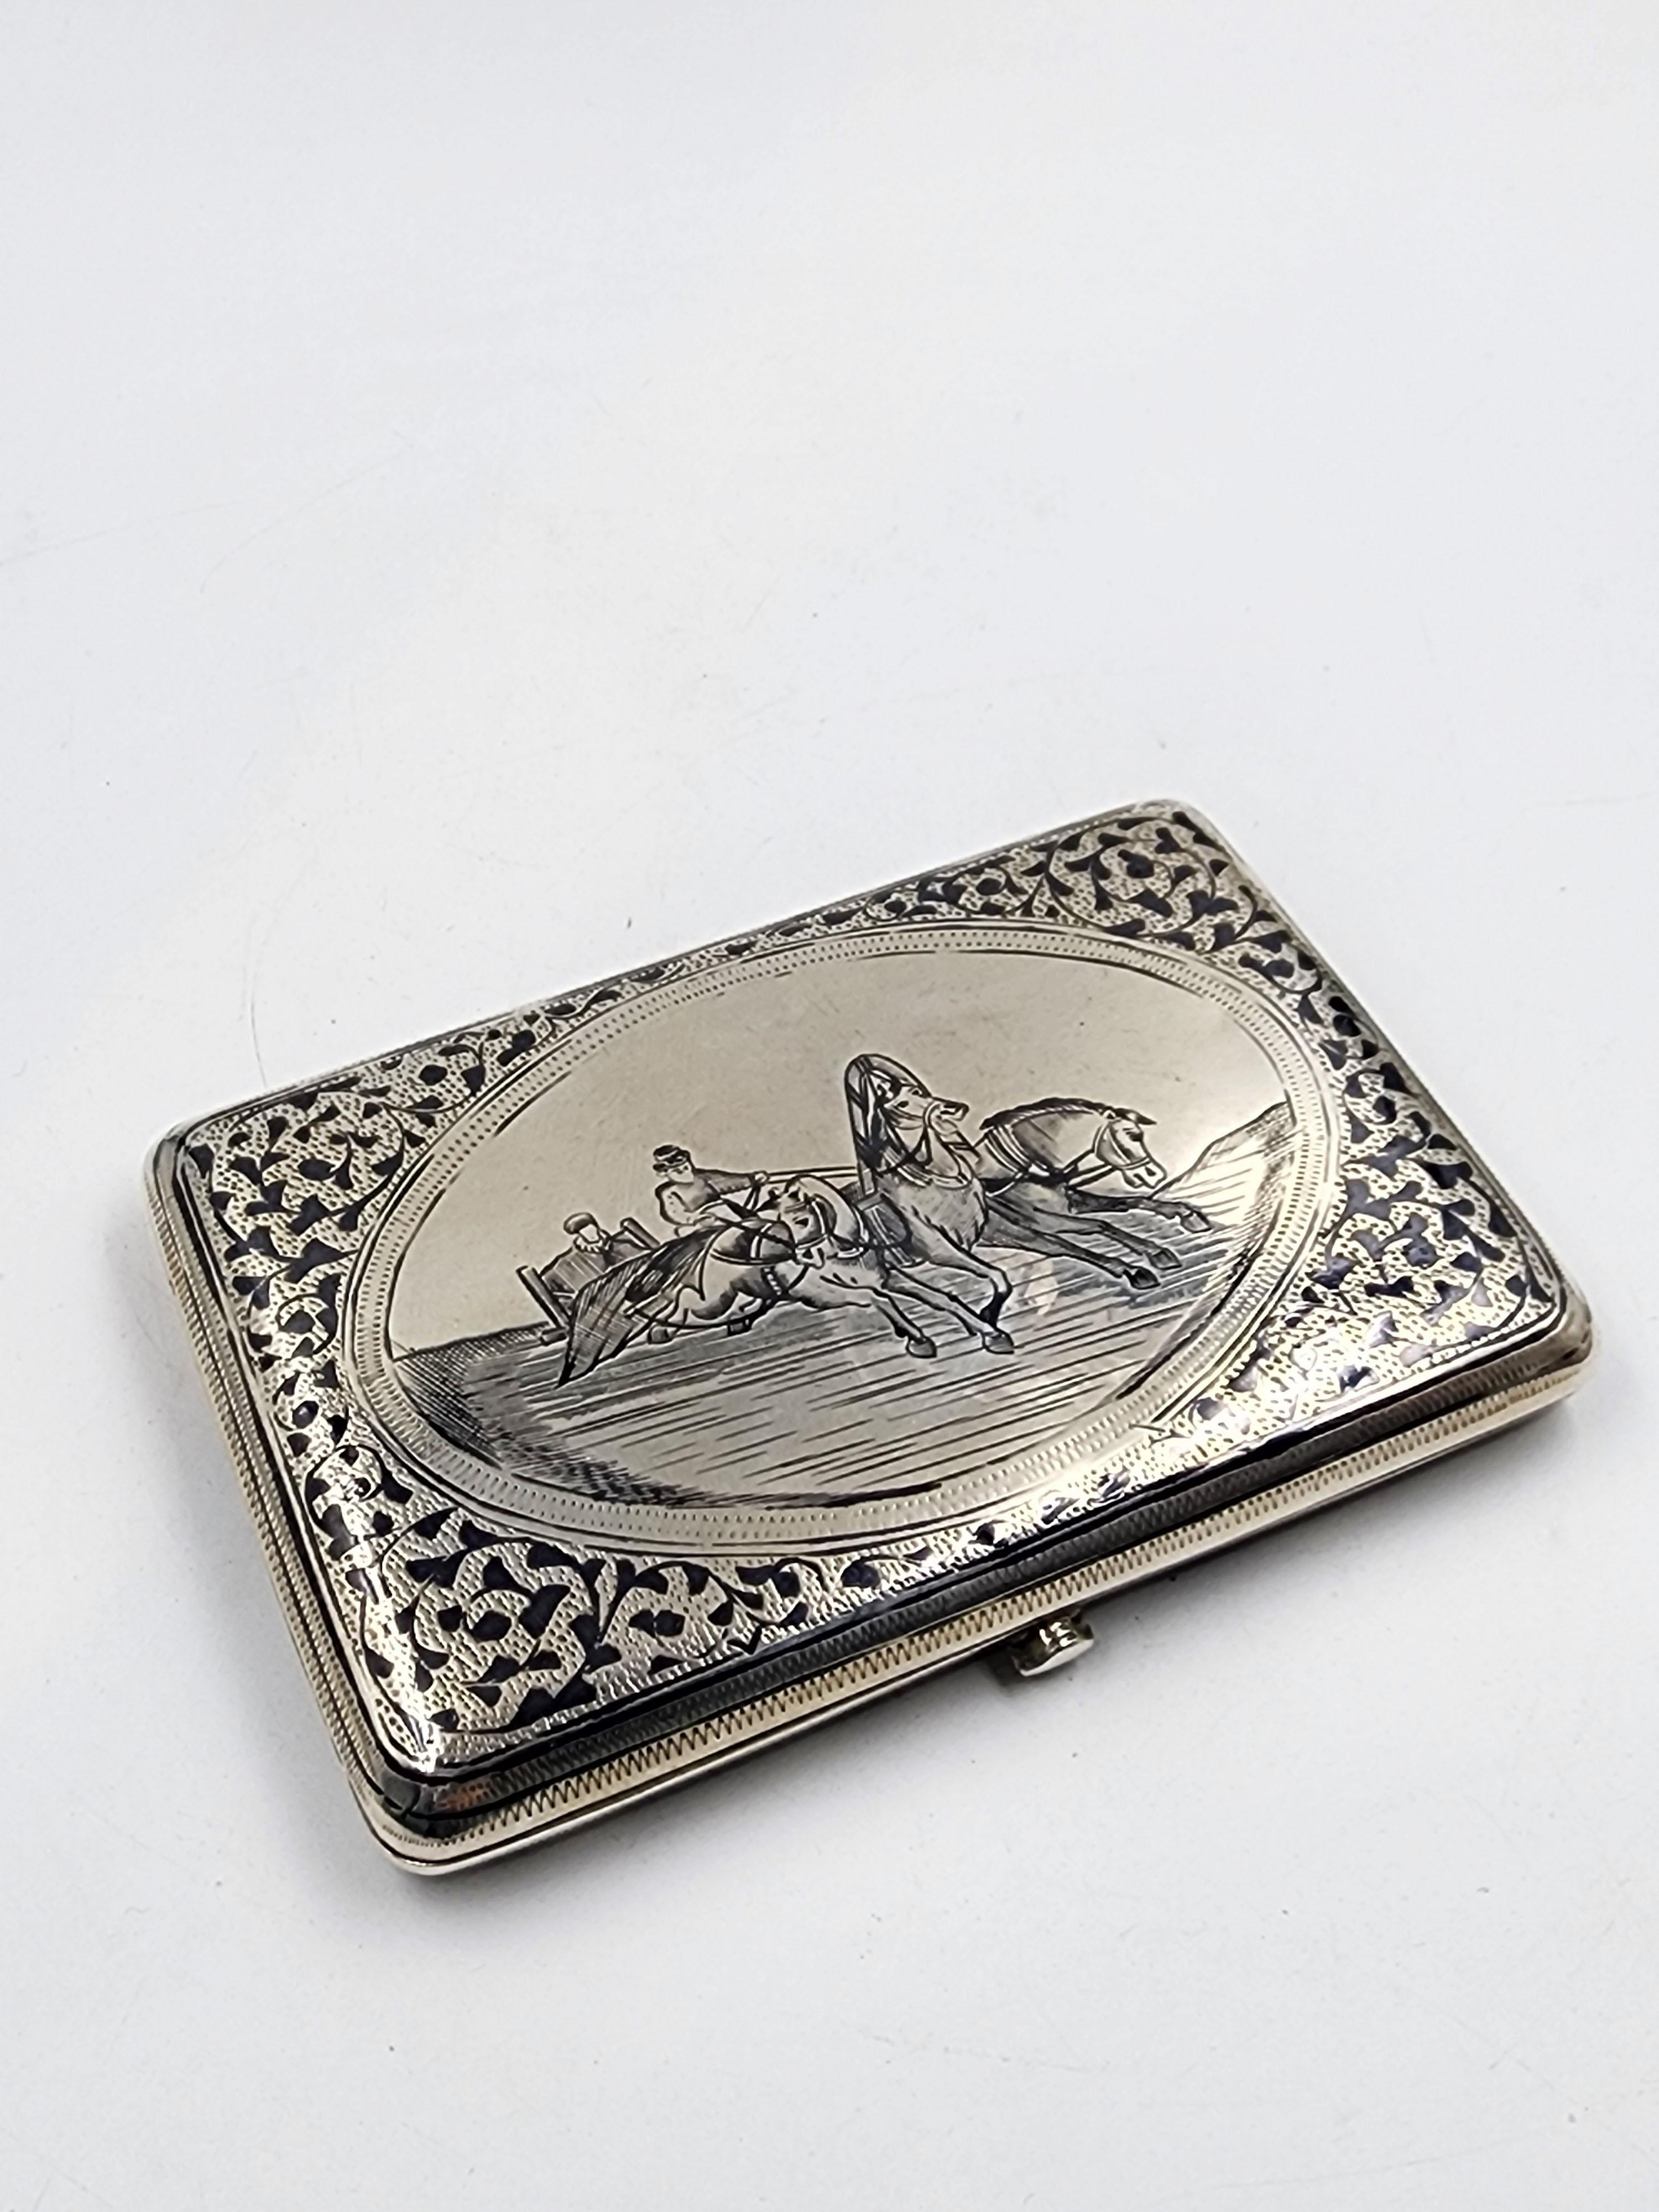 19th Century Russian silver and nickel plated tobacco box 